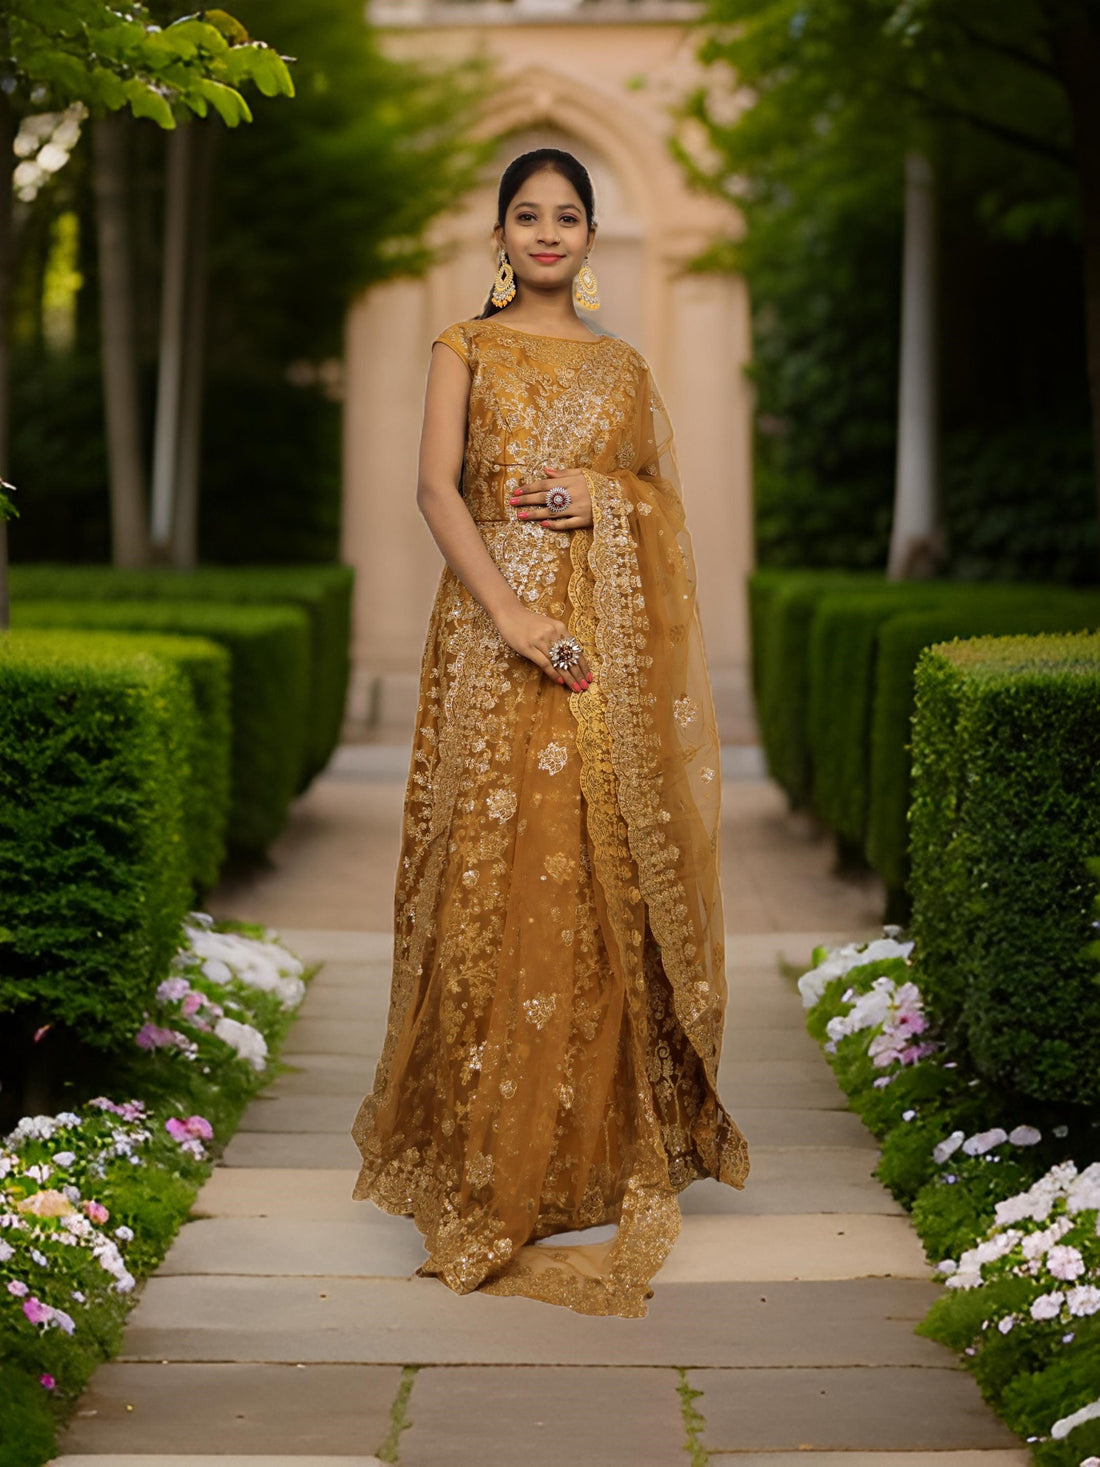 Gown with Shimmery Rubber &amp; Beads Work by Shreekama Mustard Yellow Designer Gowns for Party Festival Wedding Occasion in Noida